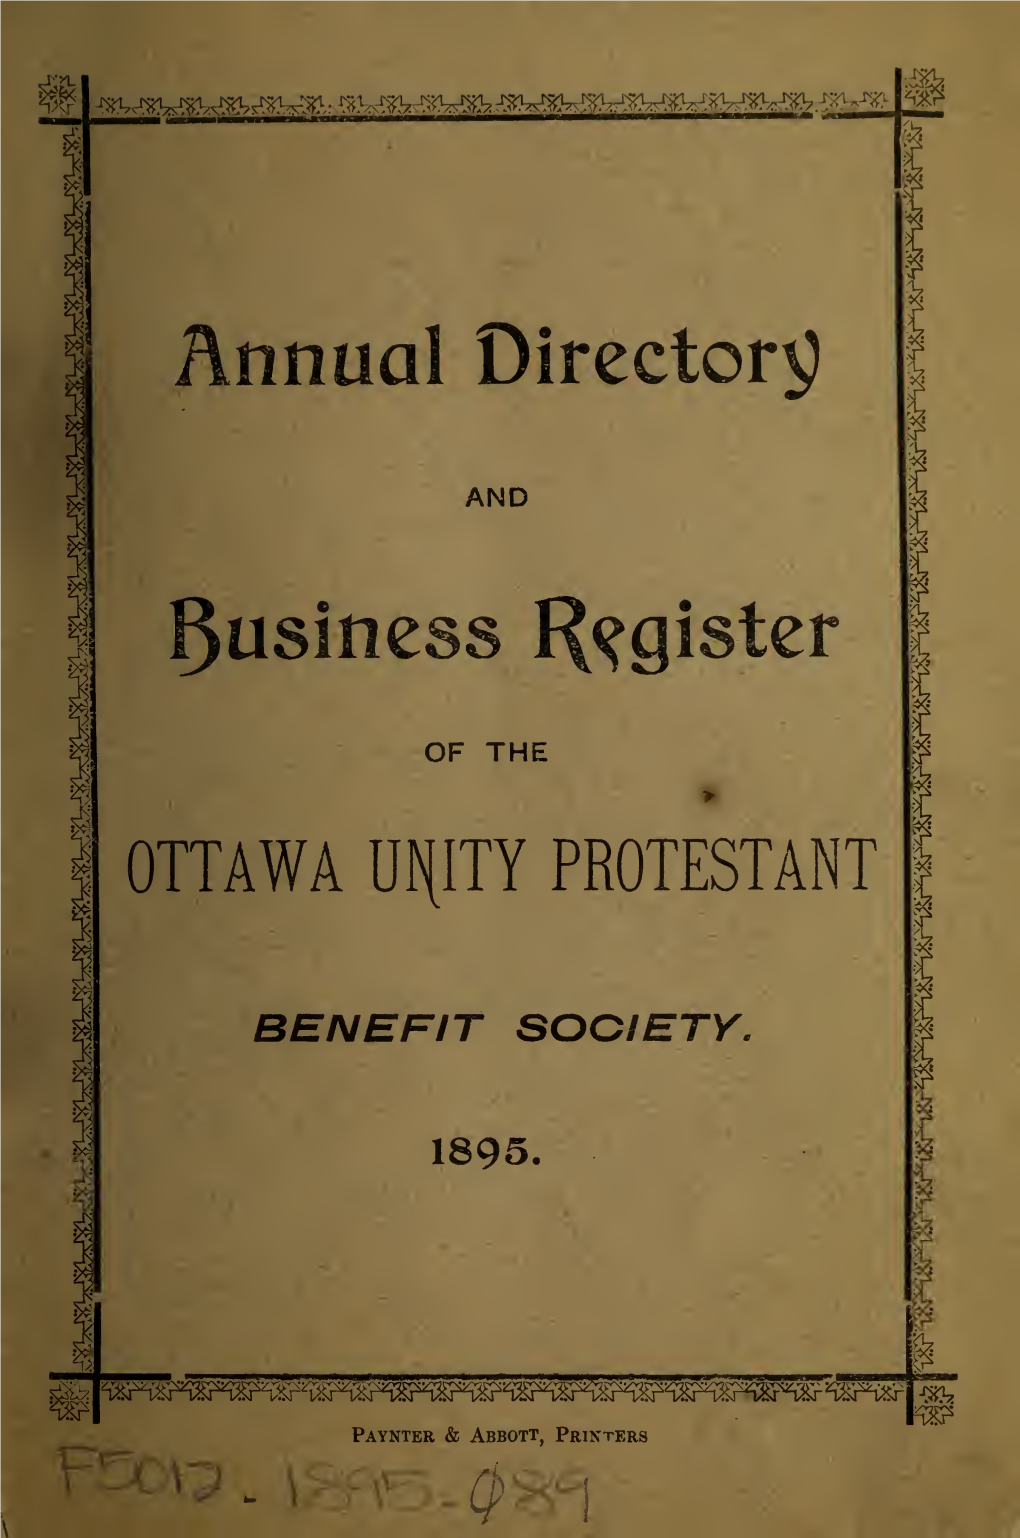 Annual Directory and Business Register of the Ottawa Unity Protestant